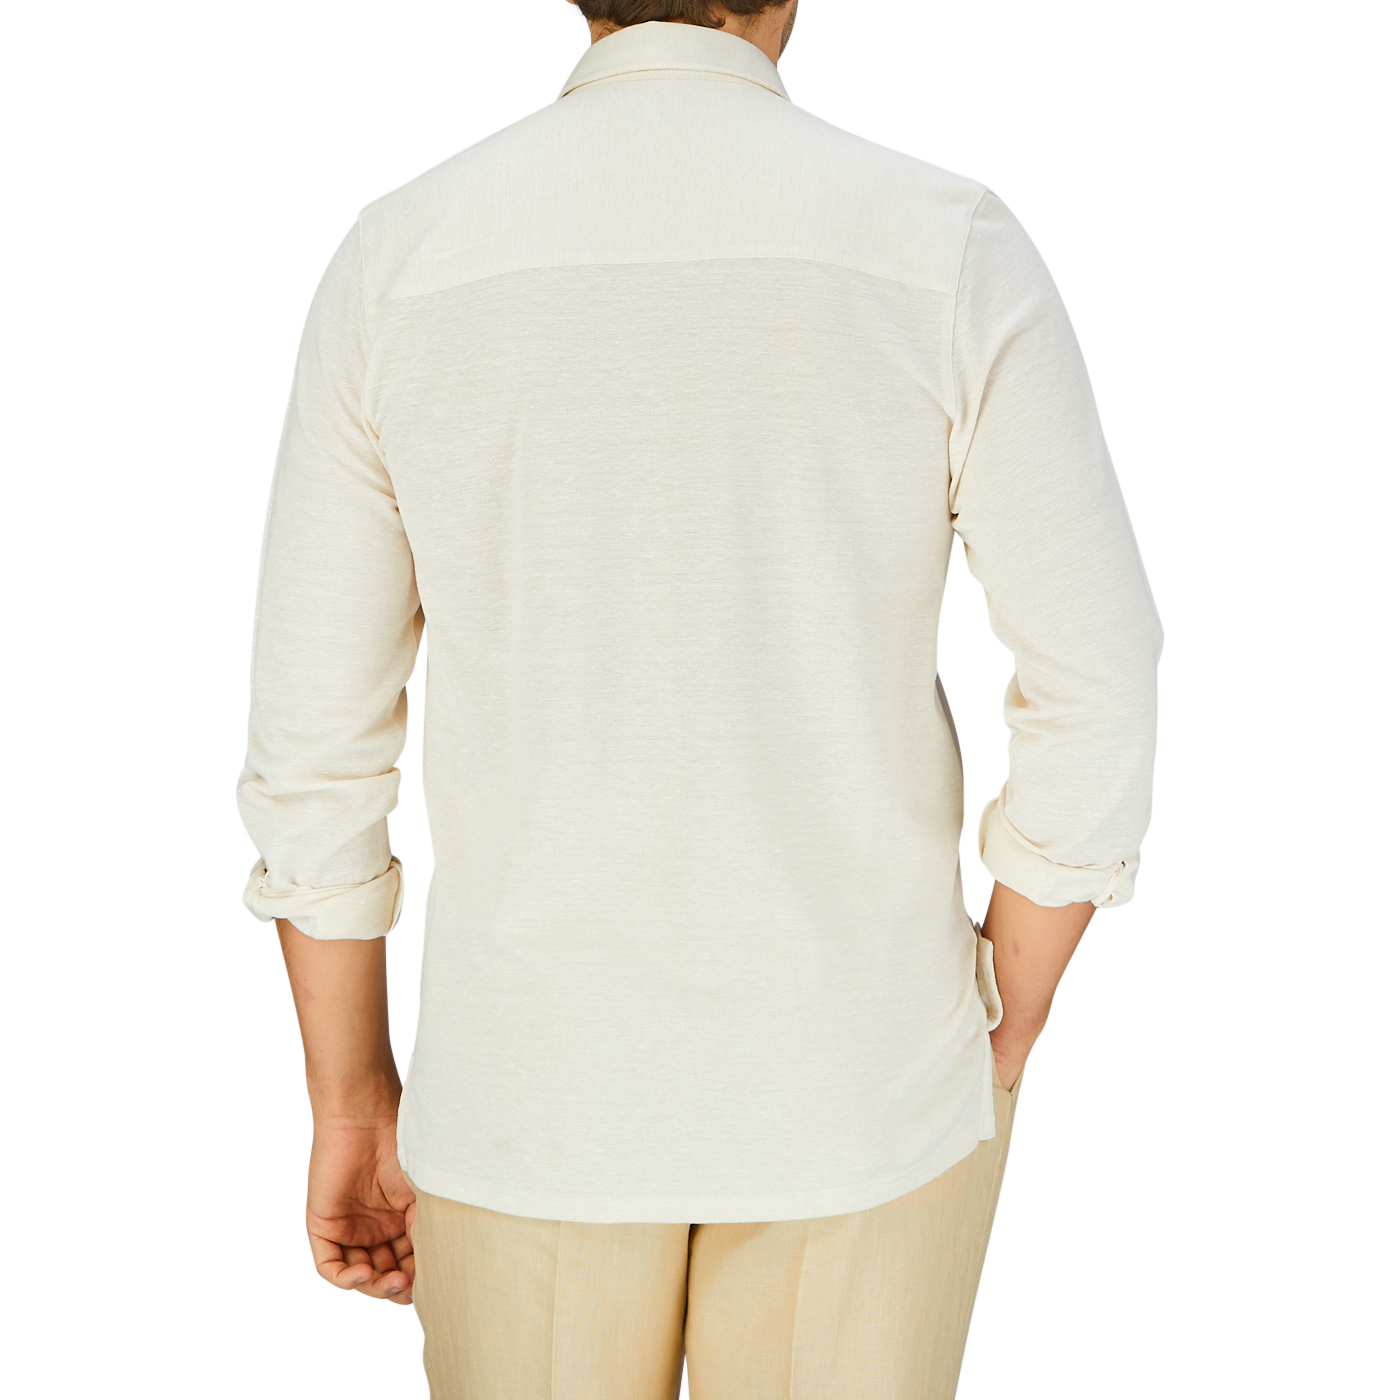 Rear view of a person wearing a Fedeli Ecru Cotton Linen Piquet Polo Shirt and beige trousers against a blue background.